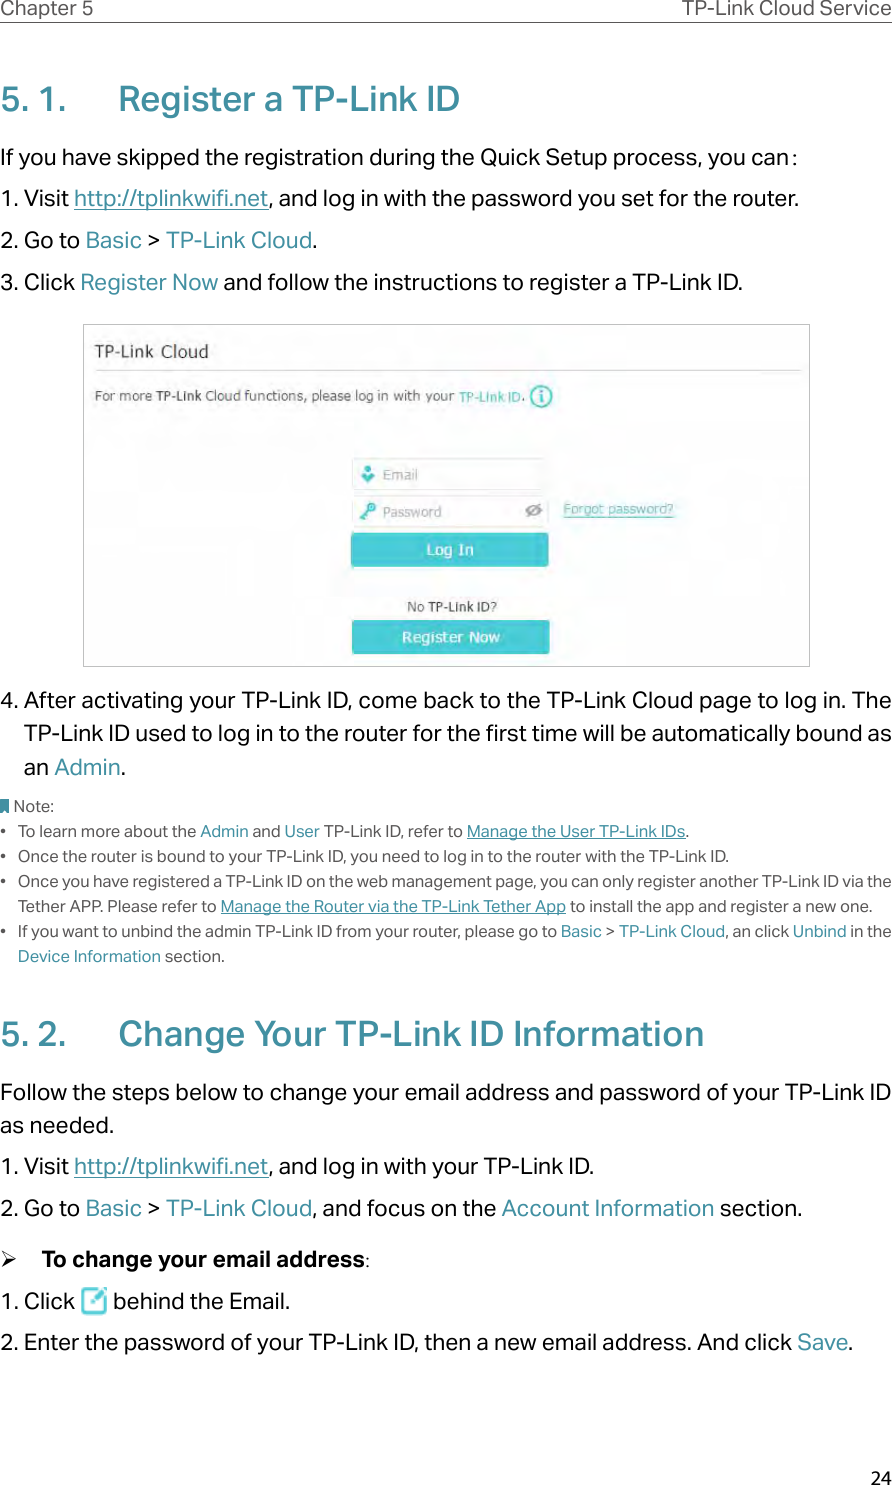 24Chapter 5 TP-Link Cloud Service5. 1.  Register a TP-Link IDIf you have skipped the registration during the Quick Setup process, you can：1. Visit http://tplinkwifi.net, and log in with the password you set for the router.2. Go to Basic &gt; TP-Link Cloud.3. Click Register Now and follow the instructions to register a TP-Link ID.4. After activating your TP-Link ID, come back to the TP-Link Cloud page to log in. The TP-Link ID used to log in to the router for the first time will be automatically bound as an Admin. Note:•  To learn more about the Admin and User TP-Link ID, refer to Manage the User TP-Link IDs.•  Once the router is bound to your TP-Link ID, you need to log in to the router with the TP-Link ID. •  Once you have registered a TP-Link ID on the web management page, you can only register another TP-Link ID via the Tether APP. Please refer to Manage the Router via the TP-Link Tether App to install the app and register a new one.•  If you want to unbind the admin TP-Link ID from your router, please go to Basic &gt; TP-Link Cloud, an click Unbind in the Device Information section.5. 2.  Change Your TP-Link ID InformationFollow the steps below to change your email address and password of your TP-Link ID as needed.1. Visit http://tplinkwifi.net, and log in with your TP-Link ID.2. Go to Basic &gt; TP-Link Cloud, and focus on the Account Information section. ¾To change your email address:1. Click   behind the Email.2. Enter the password of your TP-Link ID, then a new email address. And click Save.